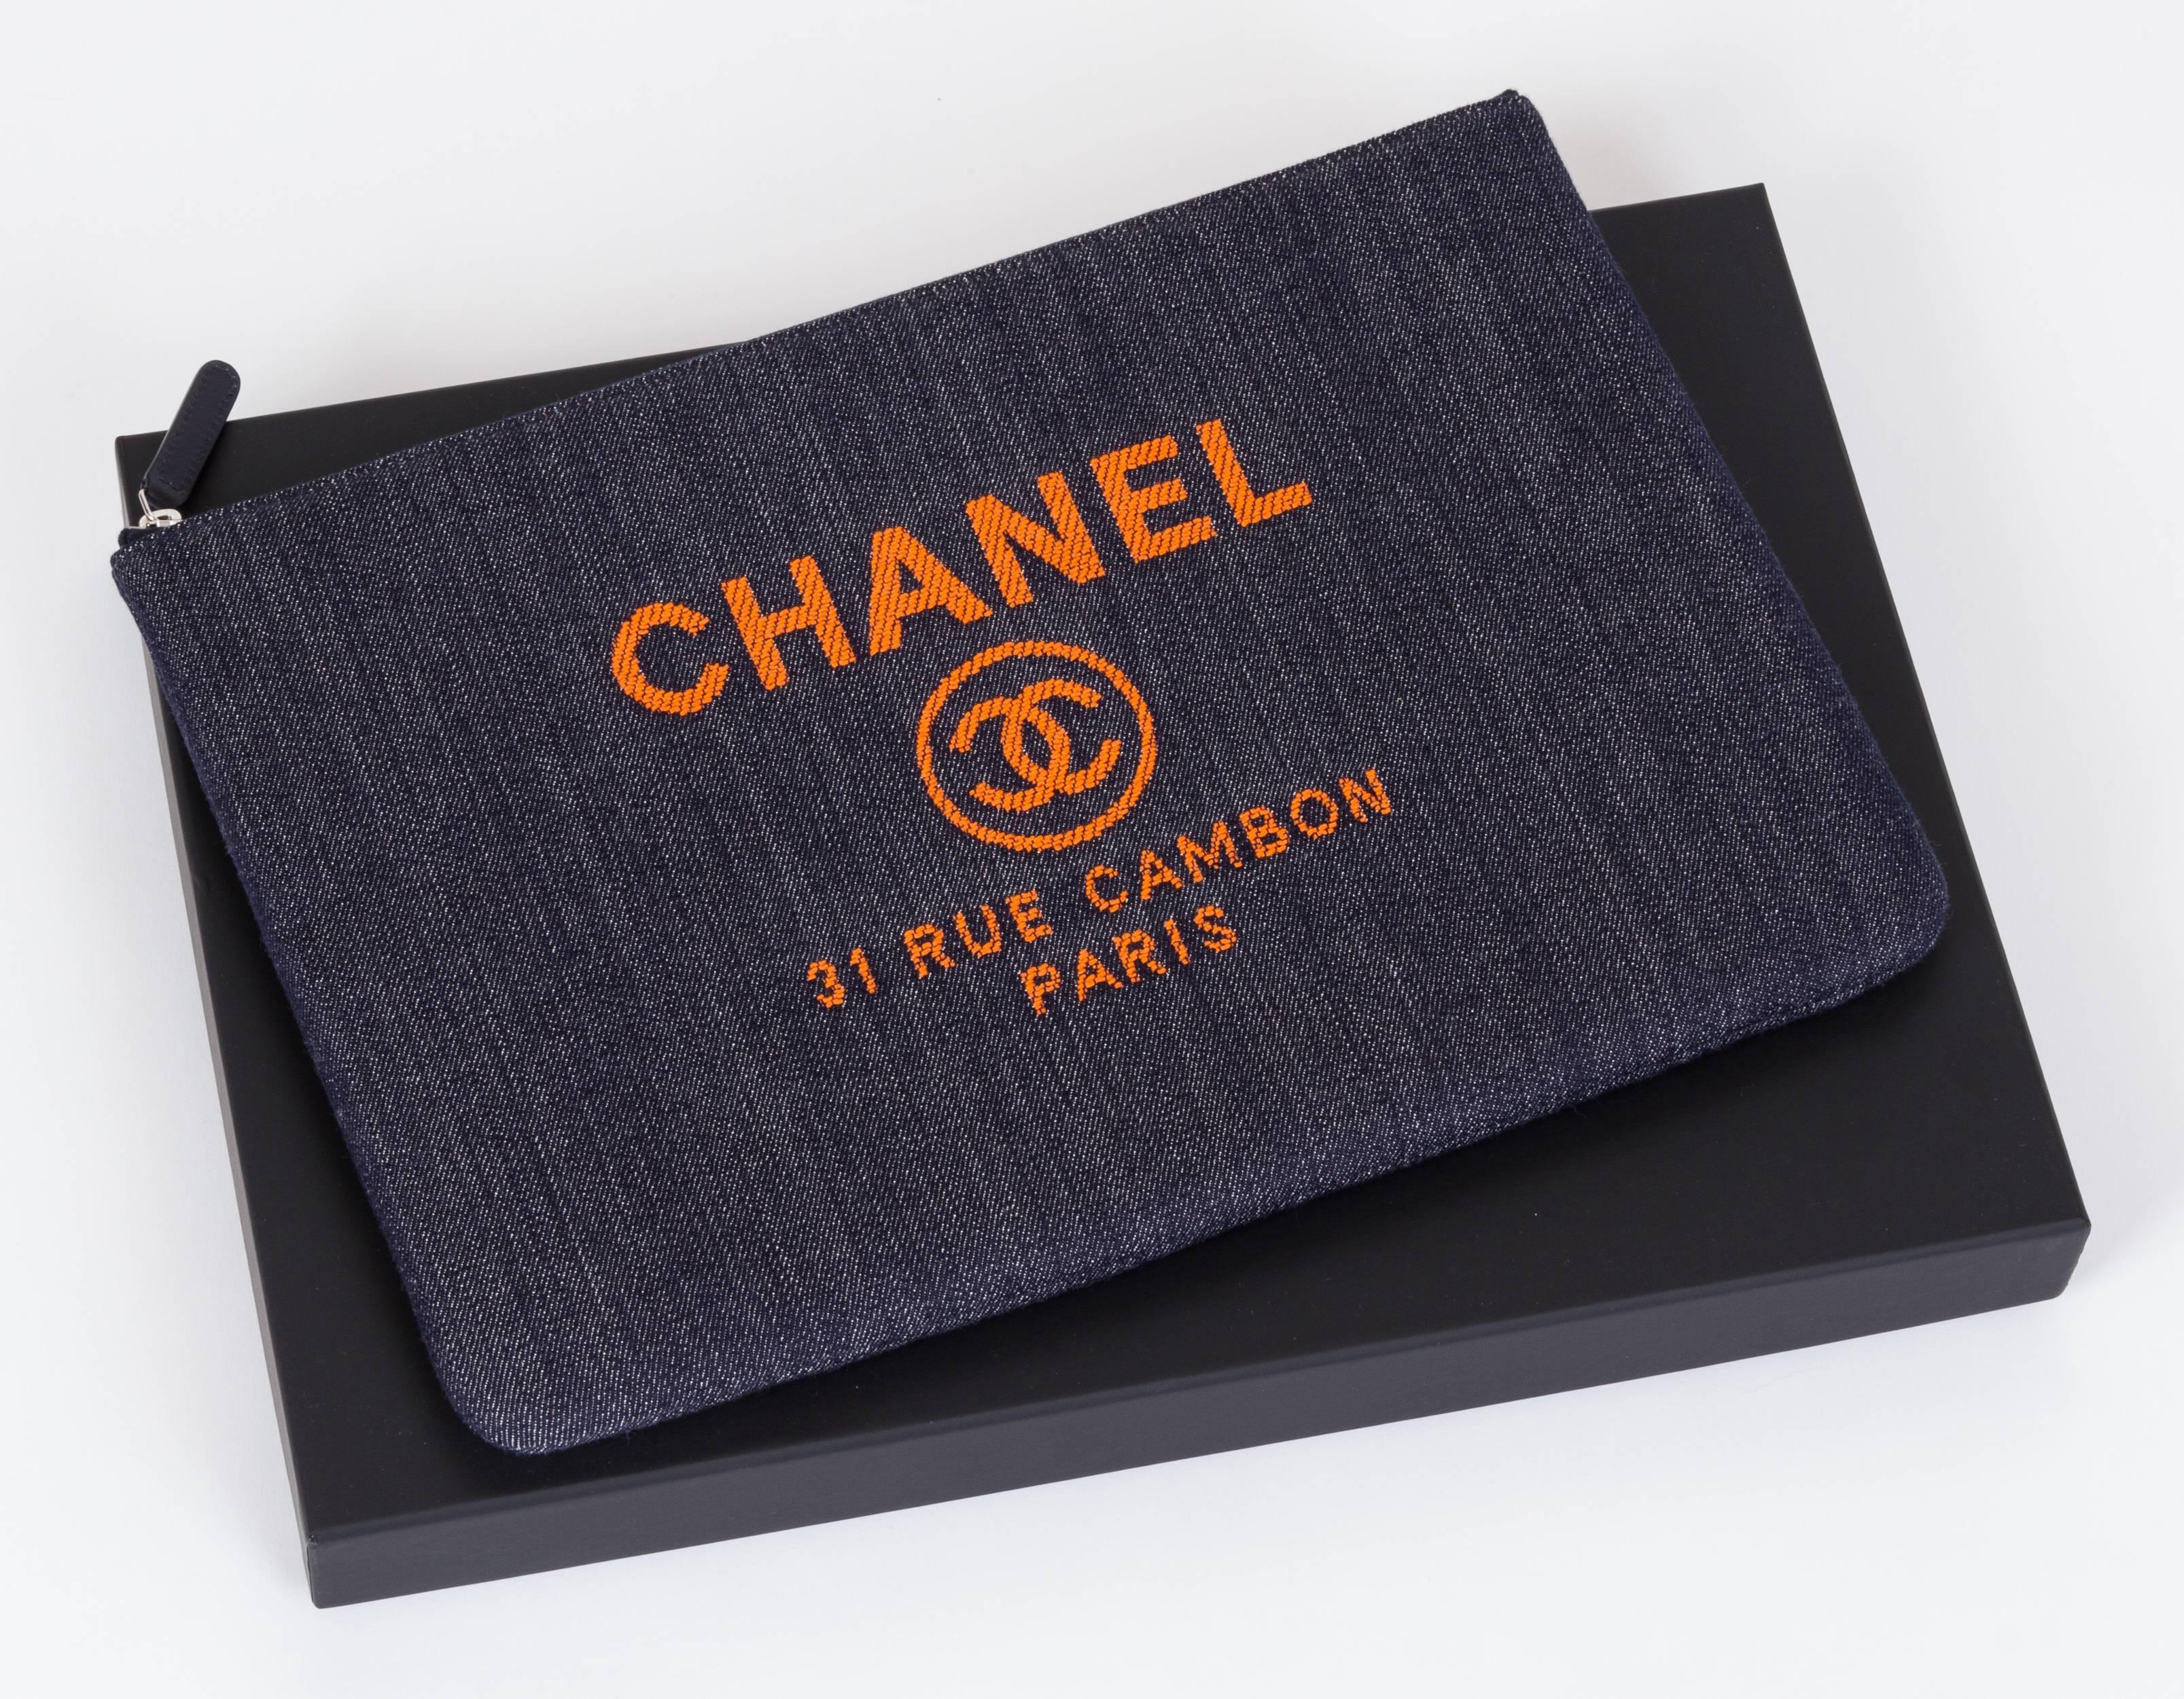 Chanel large denim clutch from Spring 2017 collection with orange signature logo, and Chanel address. New in box with hologram, ID card, booklet, dust cover, box and ribbon.